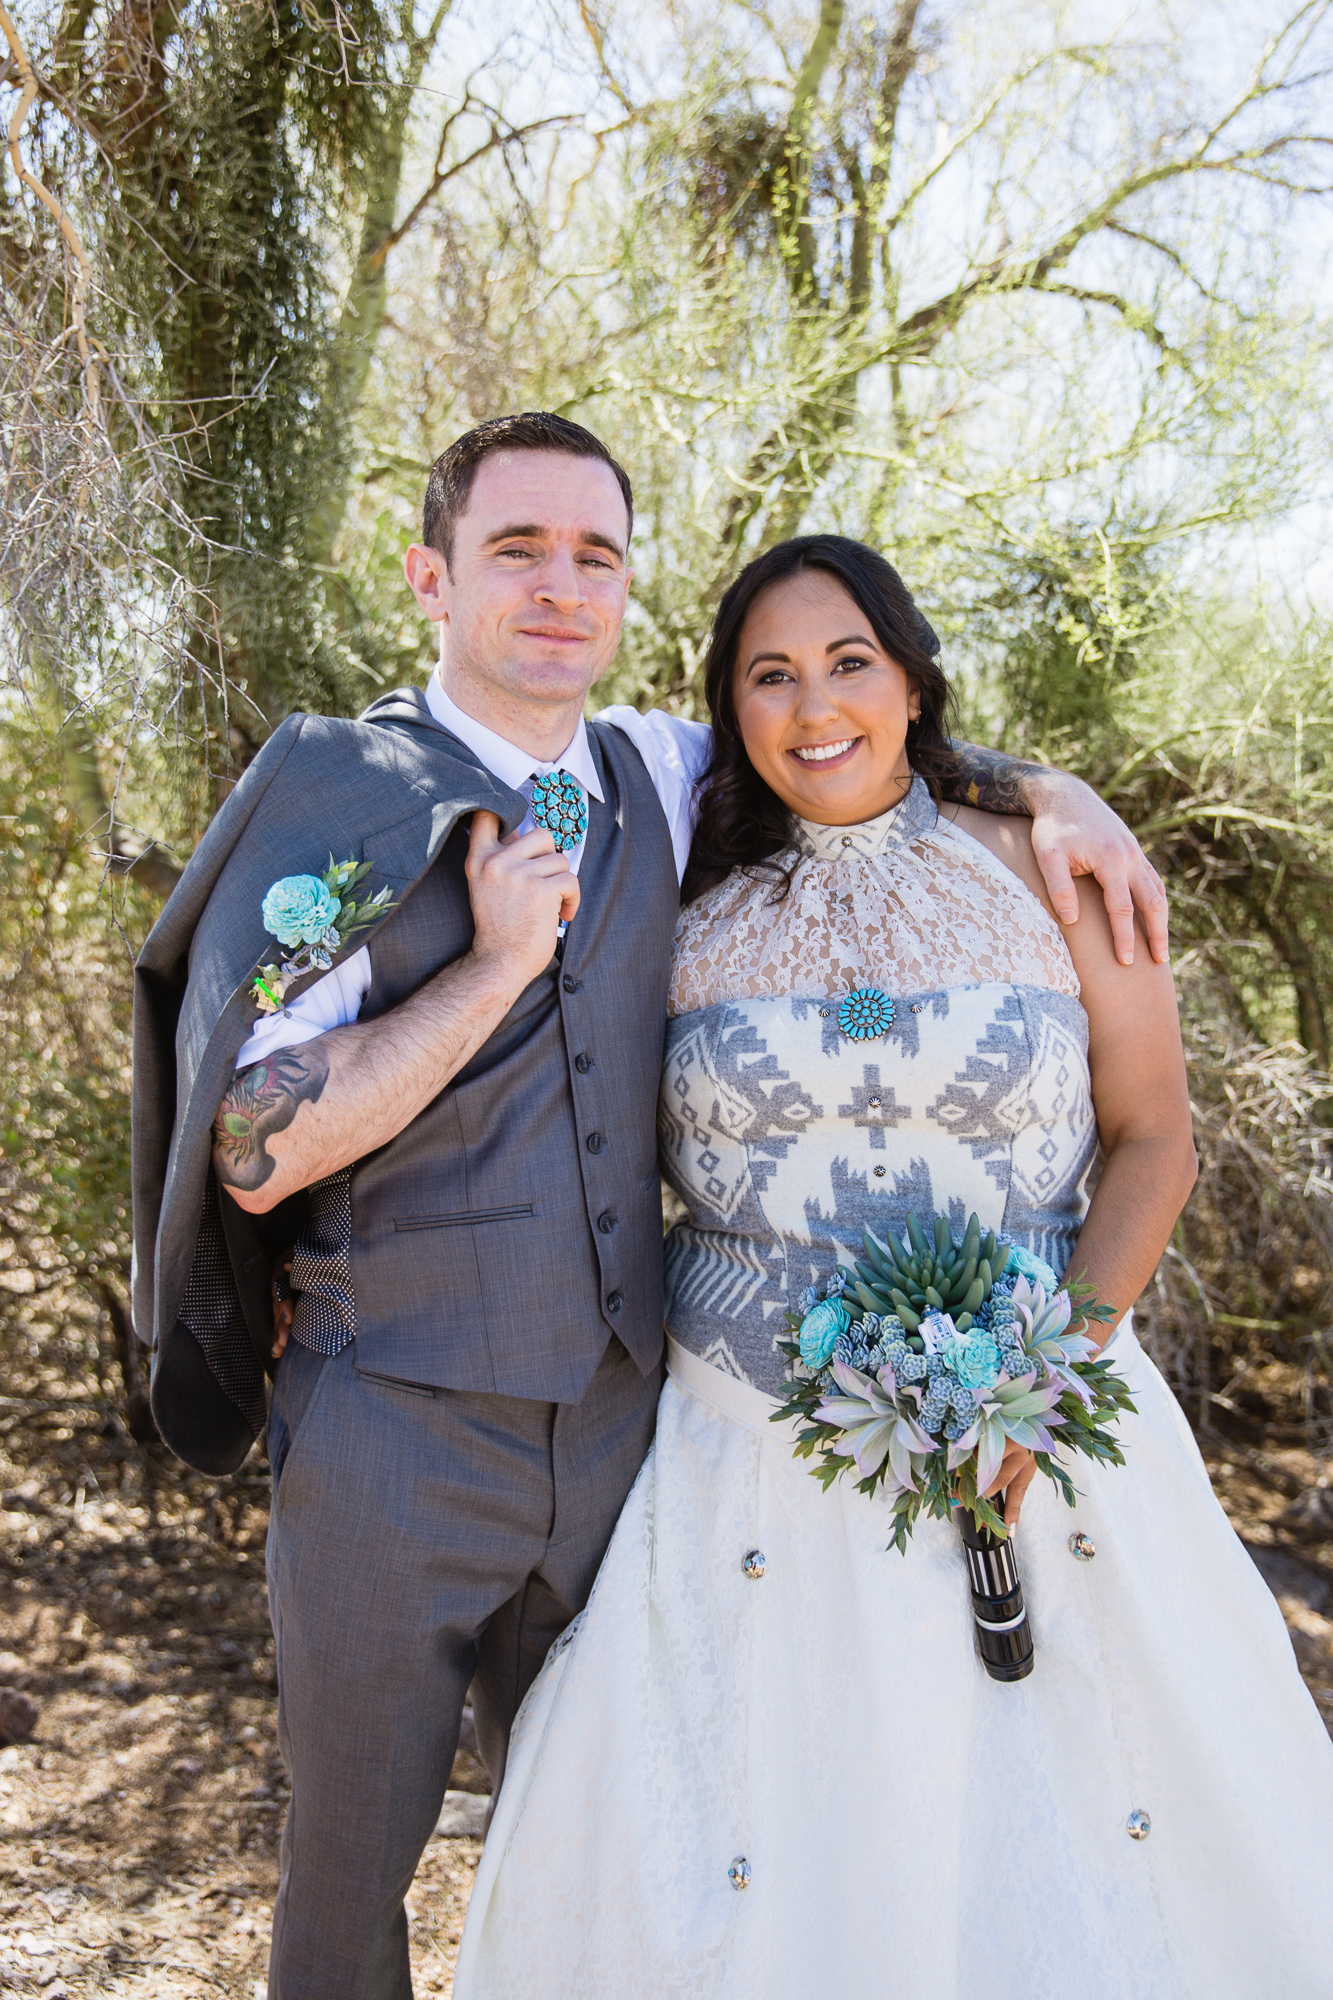 Tattooed and Irish groom and Navajo bride in a native inspired wedding dress at their Lost Dutchman State Park Star Wars wedding by Phoenix wedding photographers PMA Photography.